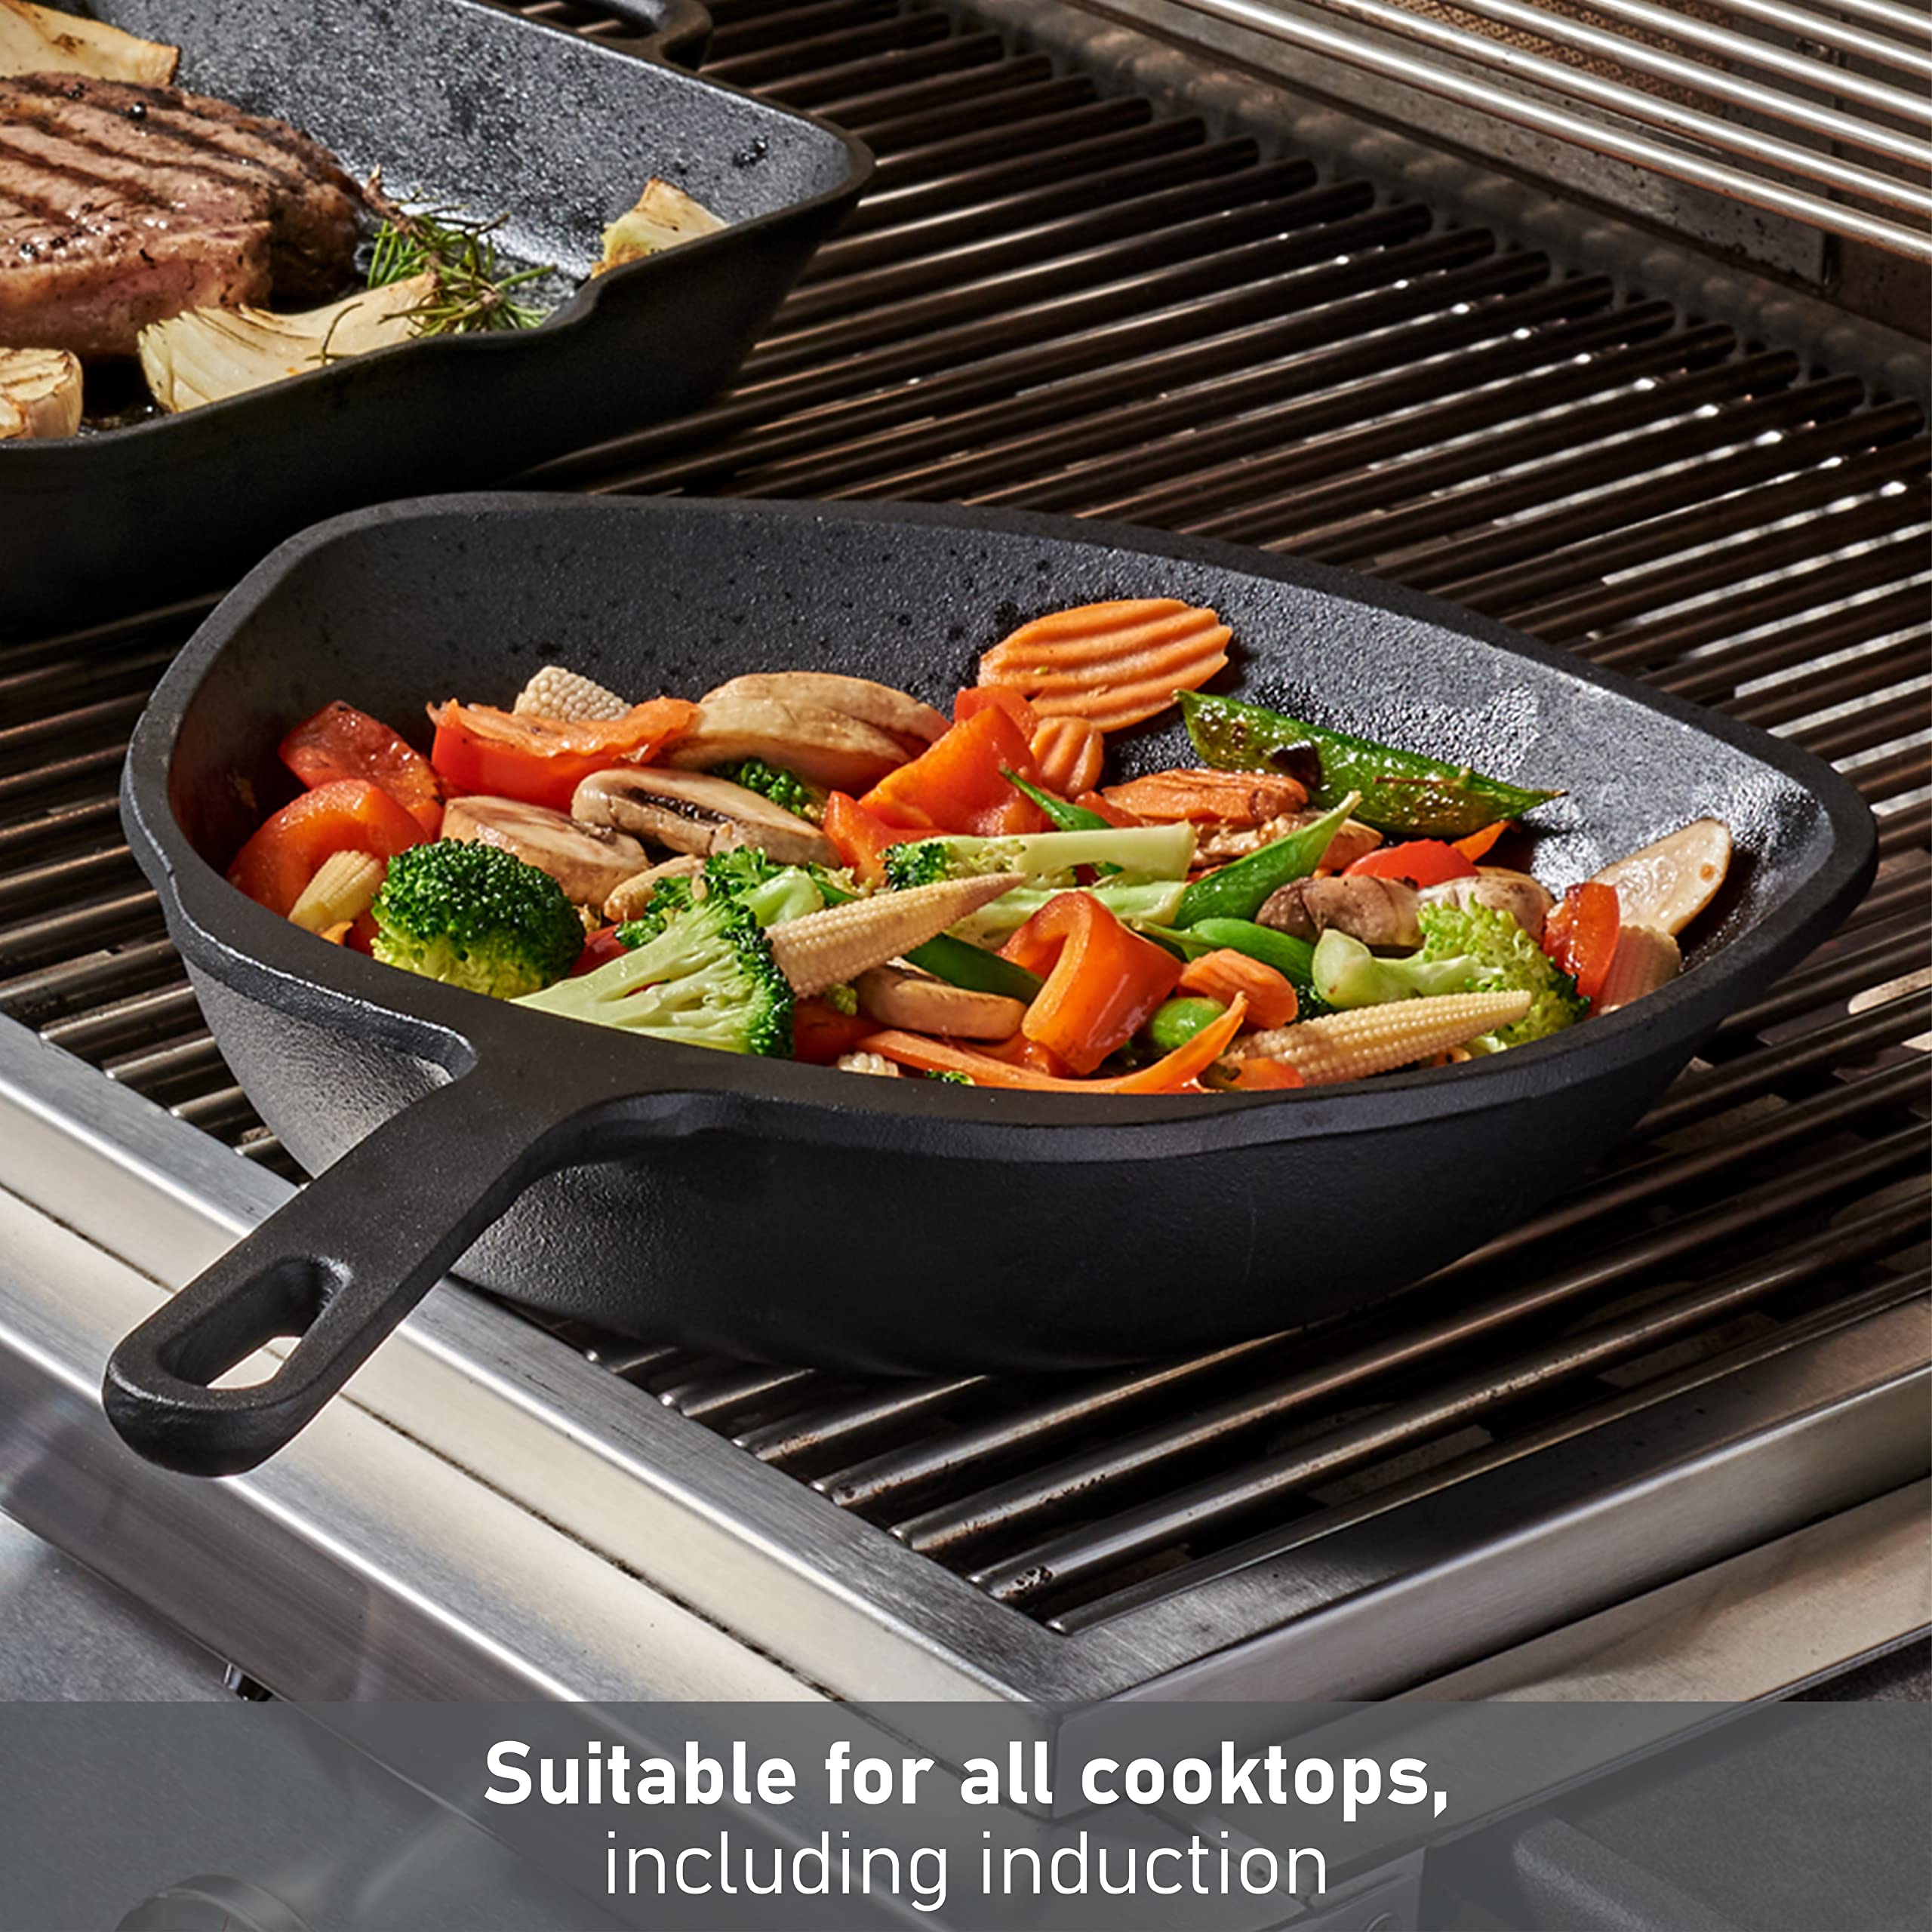 MasterPRO Pre-Seasoned Cast Iron Skillet - Unique Cooking, Saute and Frying Pan for Indoor and Outdoor Use – BBQ Grill, Fire, Oven Safe Camping Cookware, 11” Griddle, Black